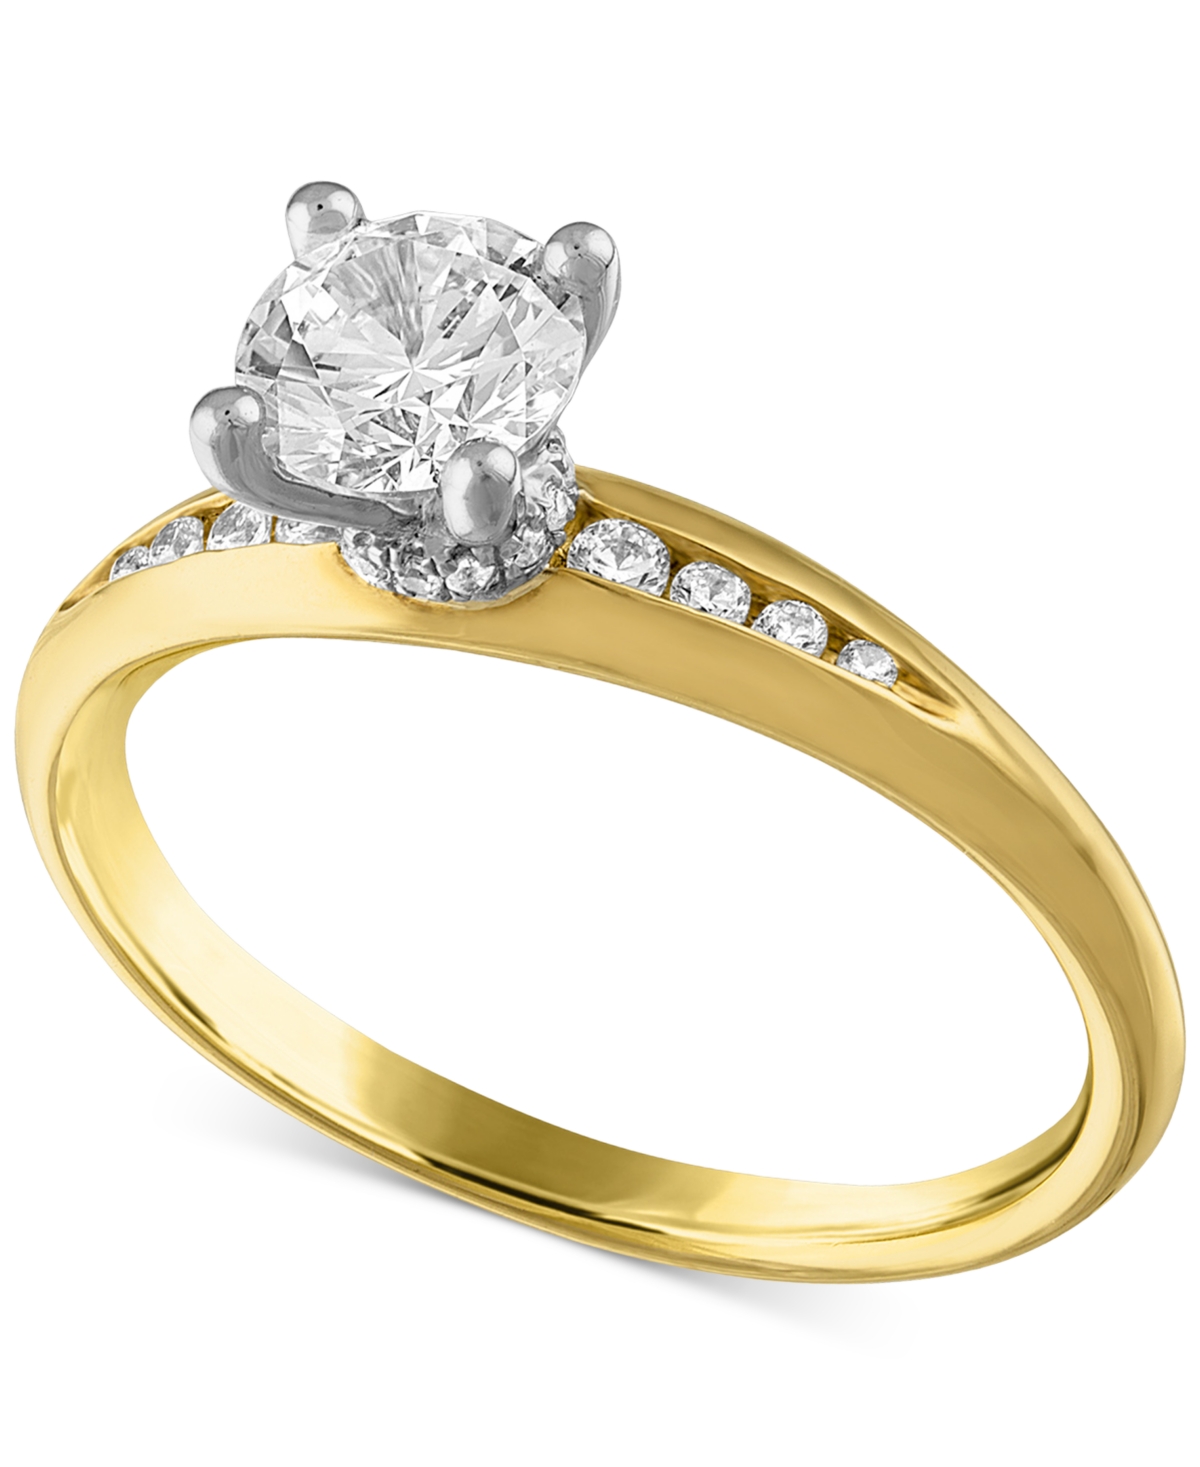 Certified Diamond Engagement Ring (7/8 ct. t.w.) in 14k Two-Tone Gold Featuring Diamonds from De Beers Code of Origin, Created for Macy's - Ye